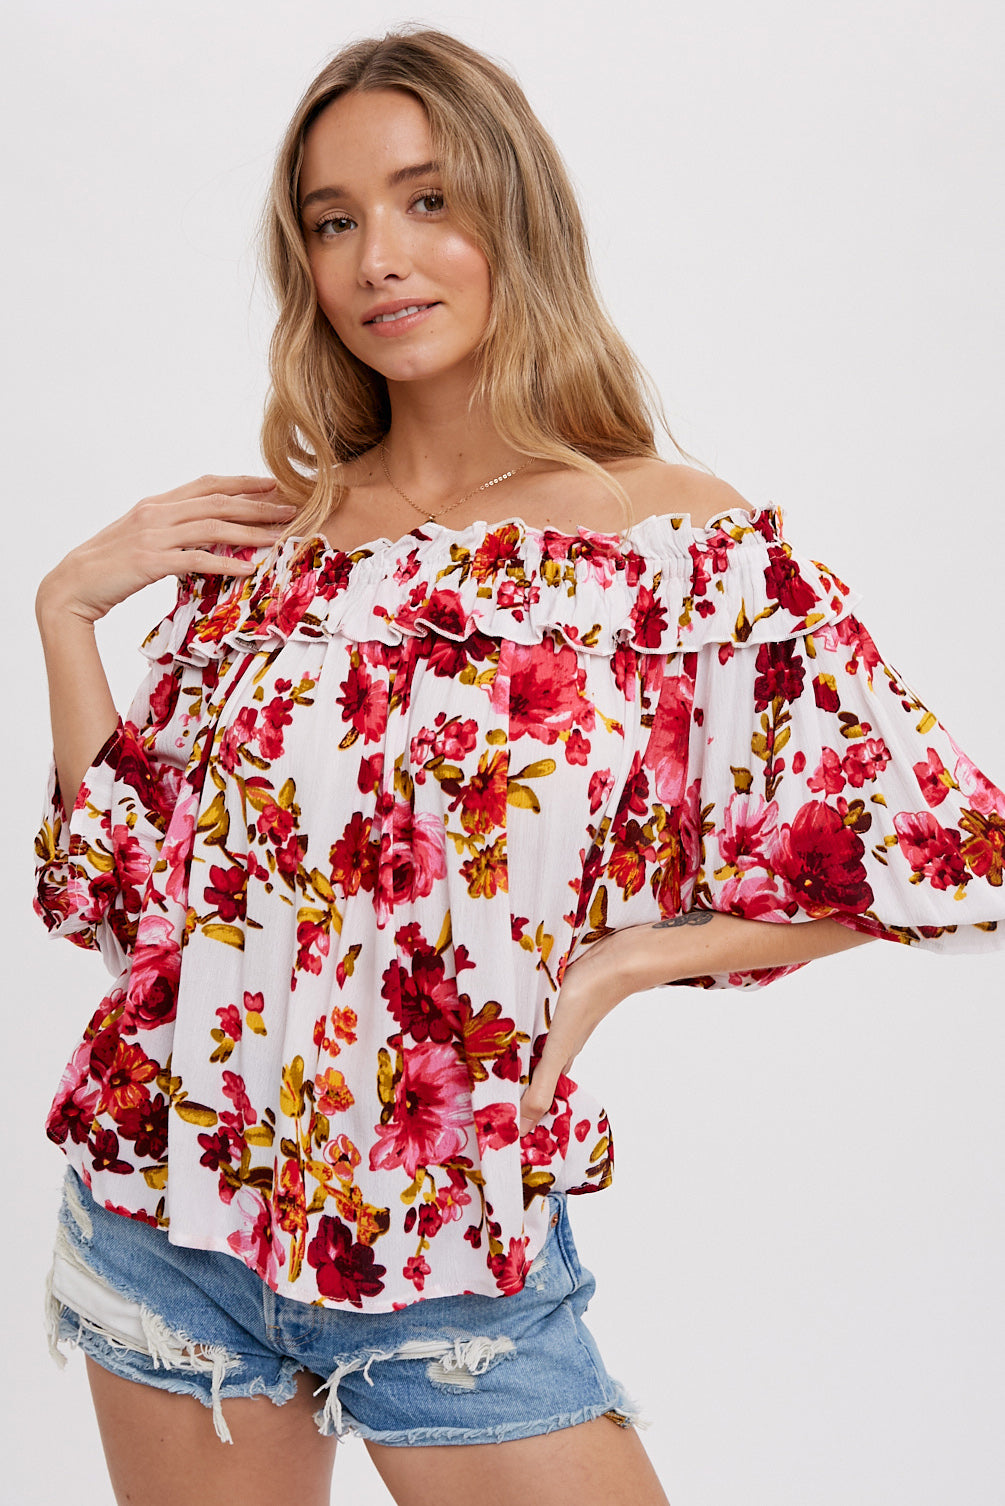 White floral blouse with elasticized ruffle neckline, size small to large.